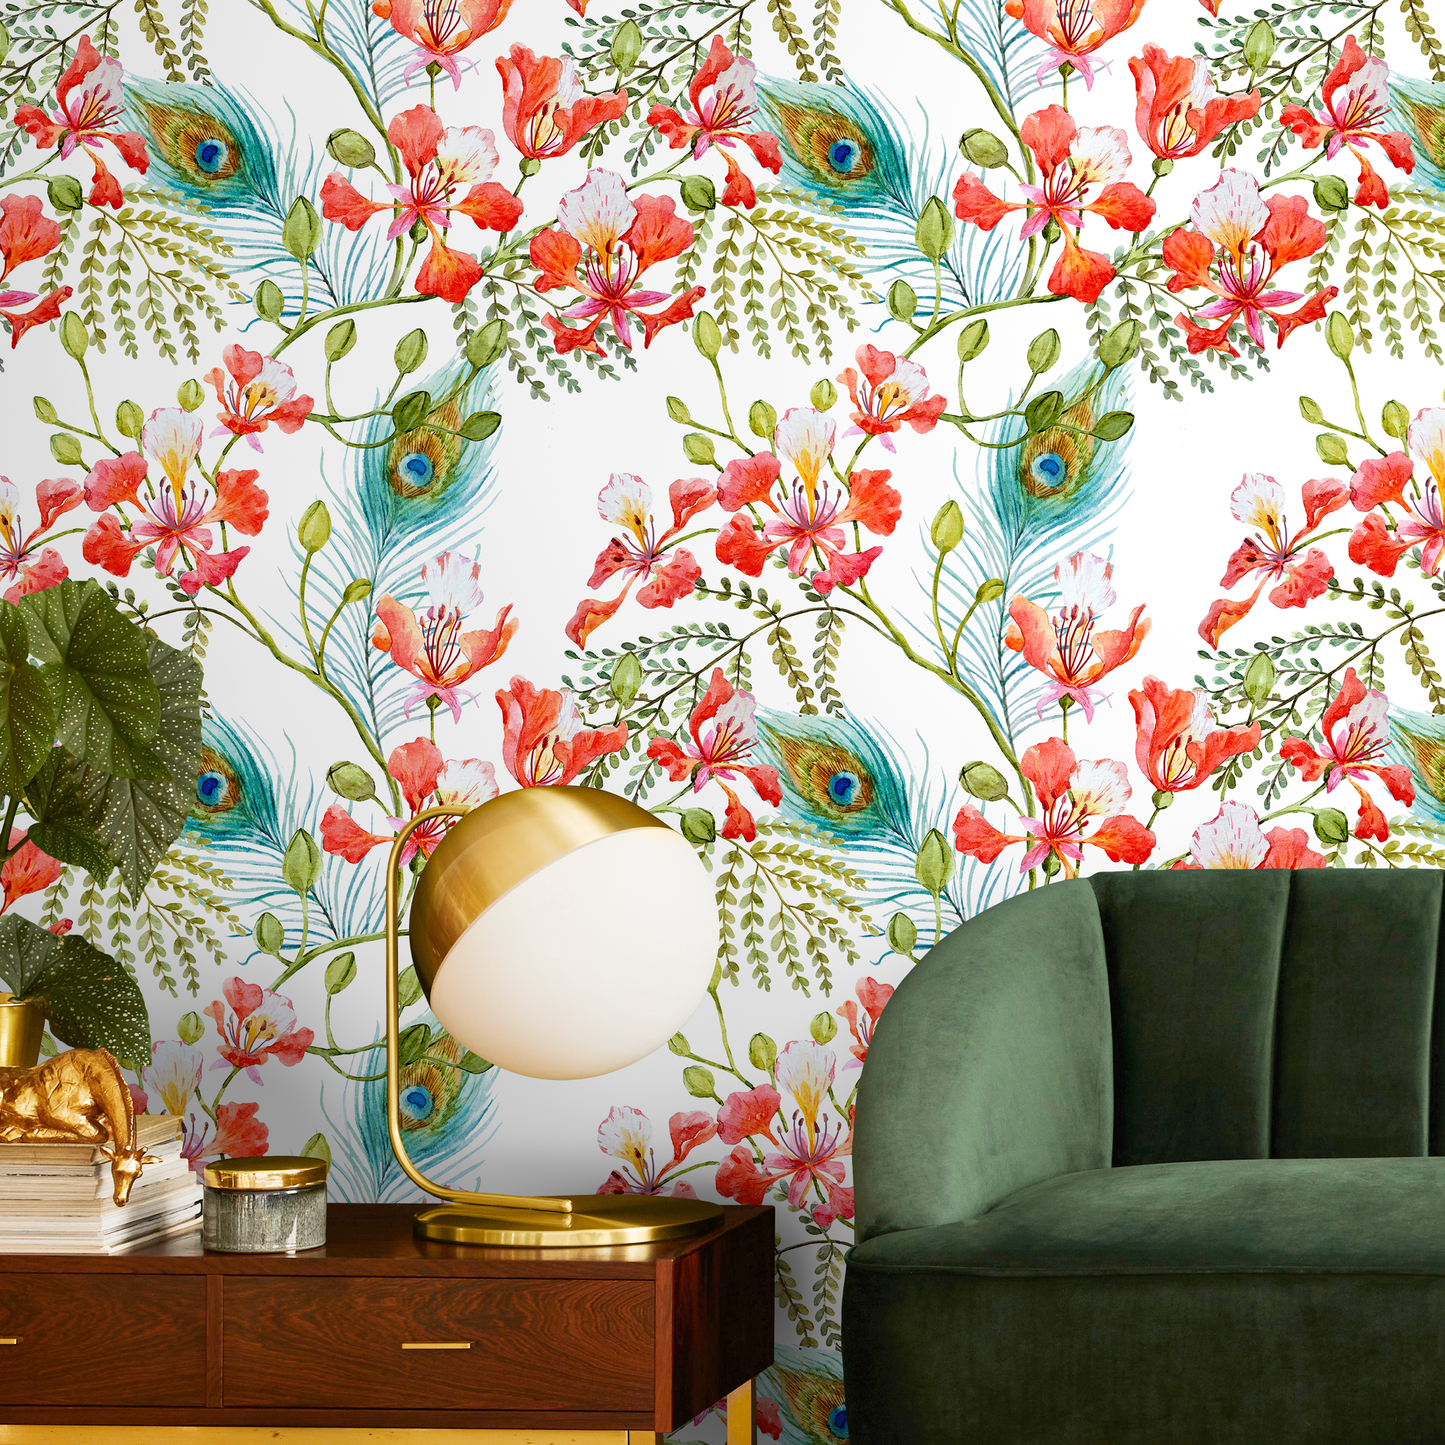 Wallpaper Peel and Stick Wallpaper Removable Wallpaper Home Decor Wall Art Wall Decor Room Decor / Vintage Floral Peacock Wallpaper - A269